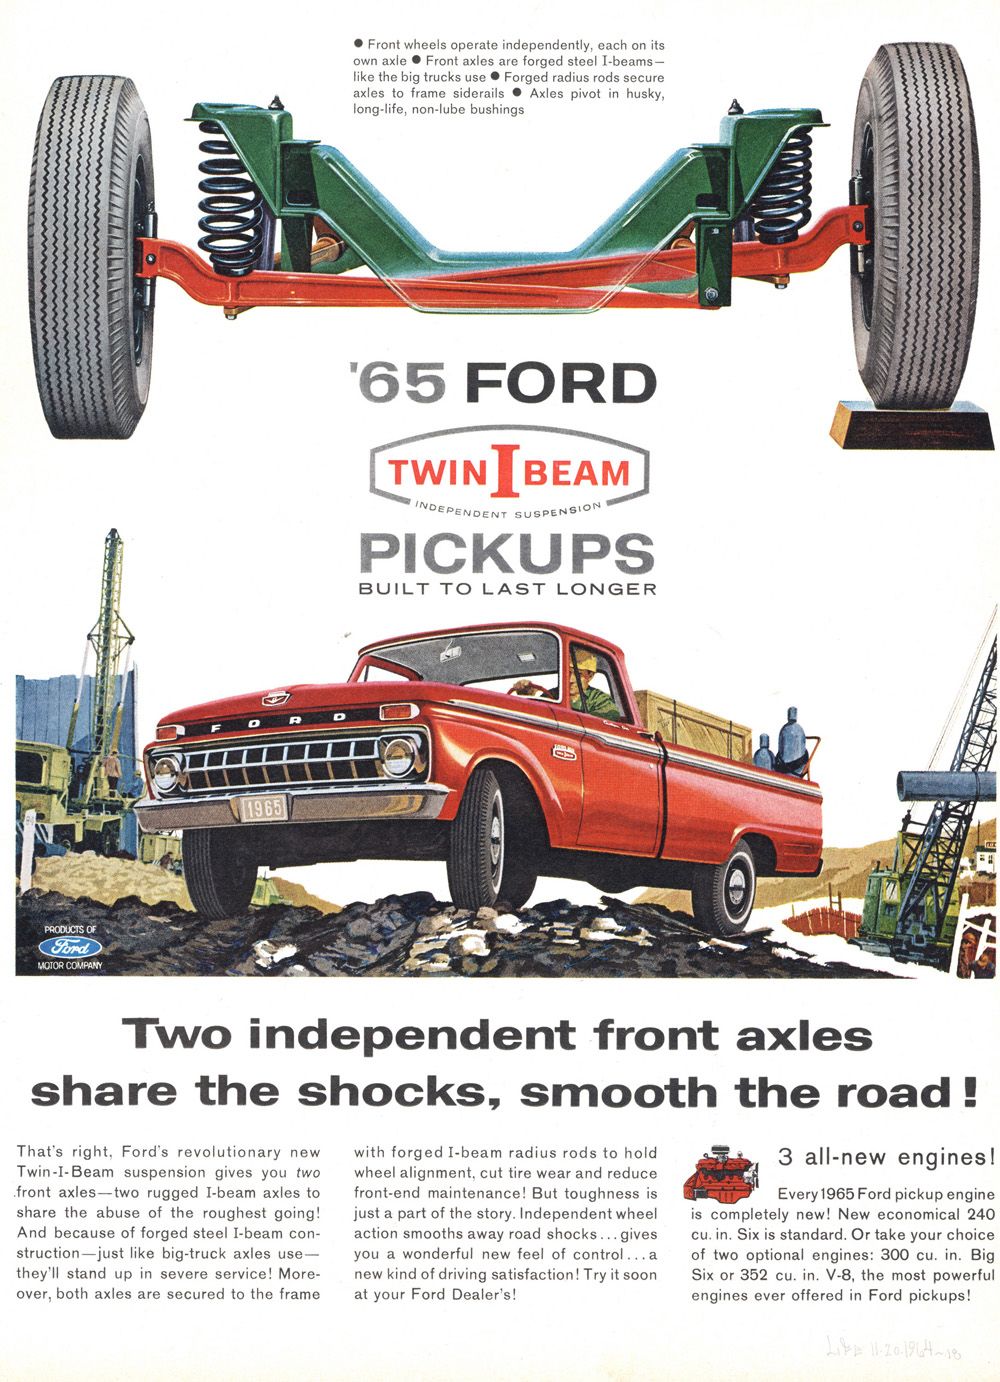 1965 Ford Twin I Beams Independent Suspension advertisement. (01/12/08)